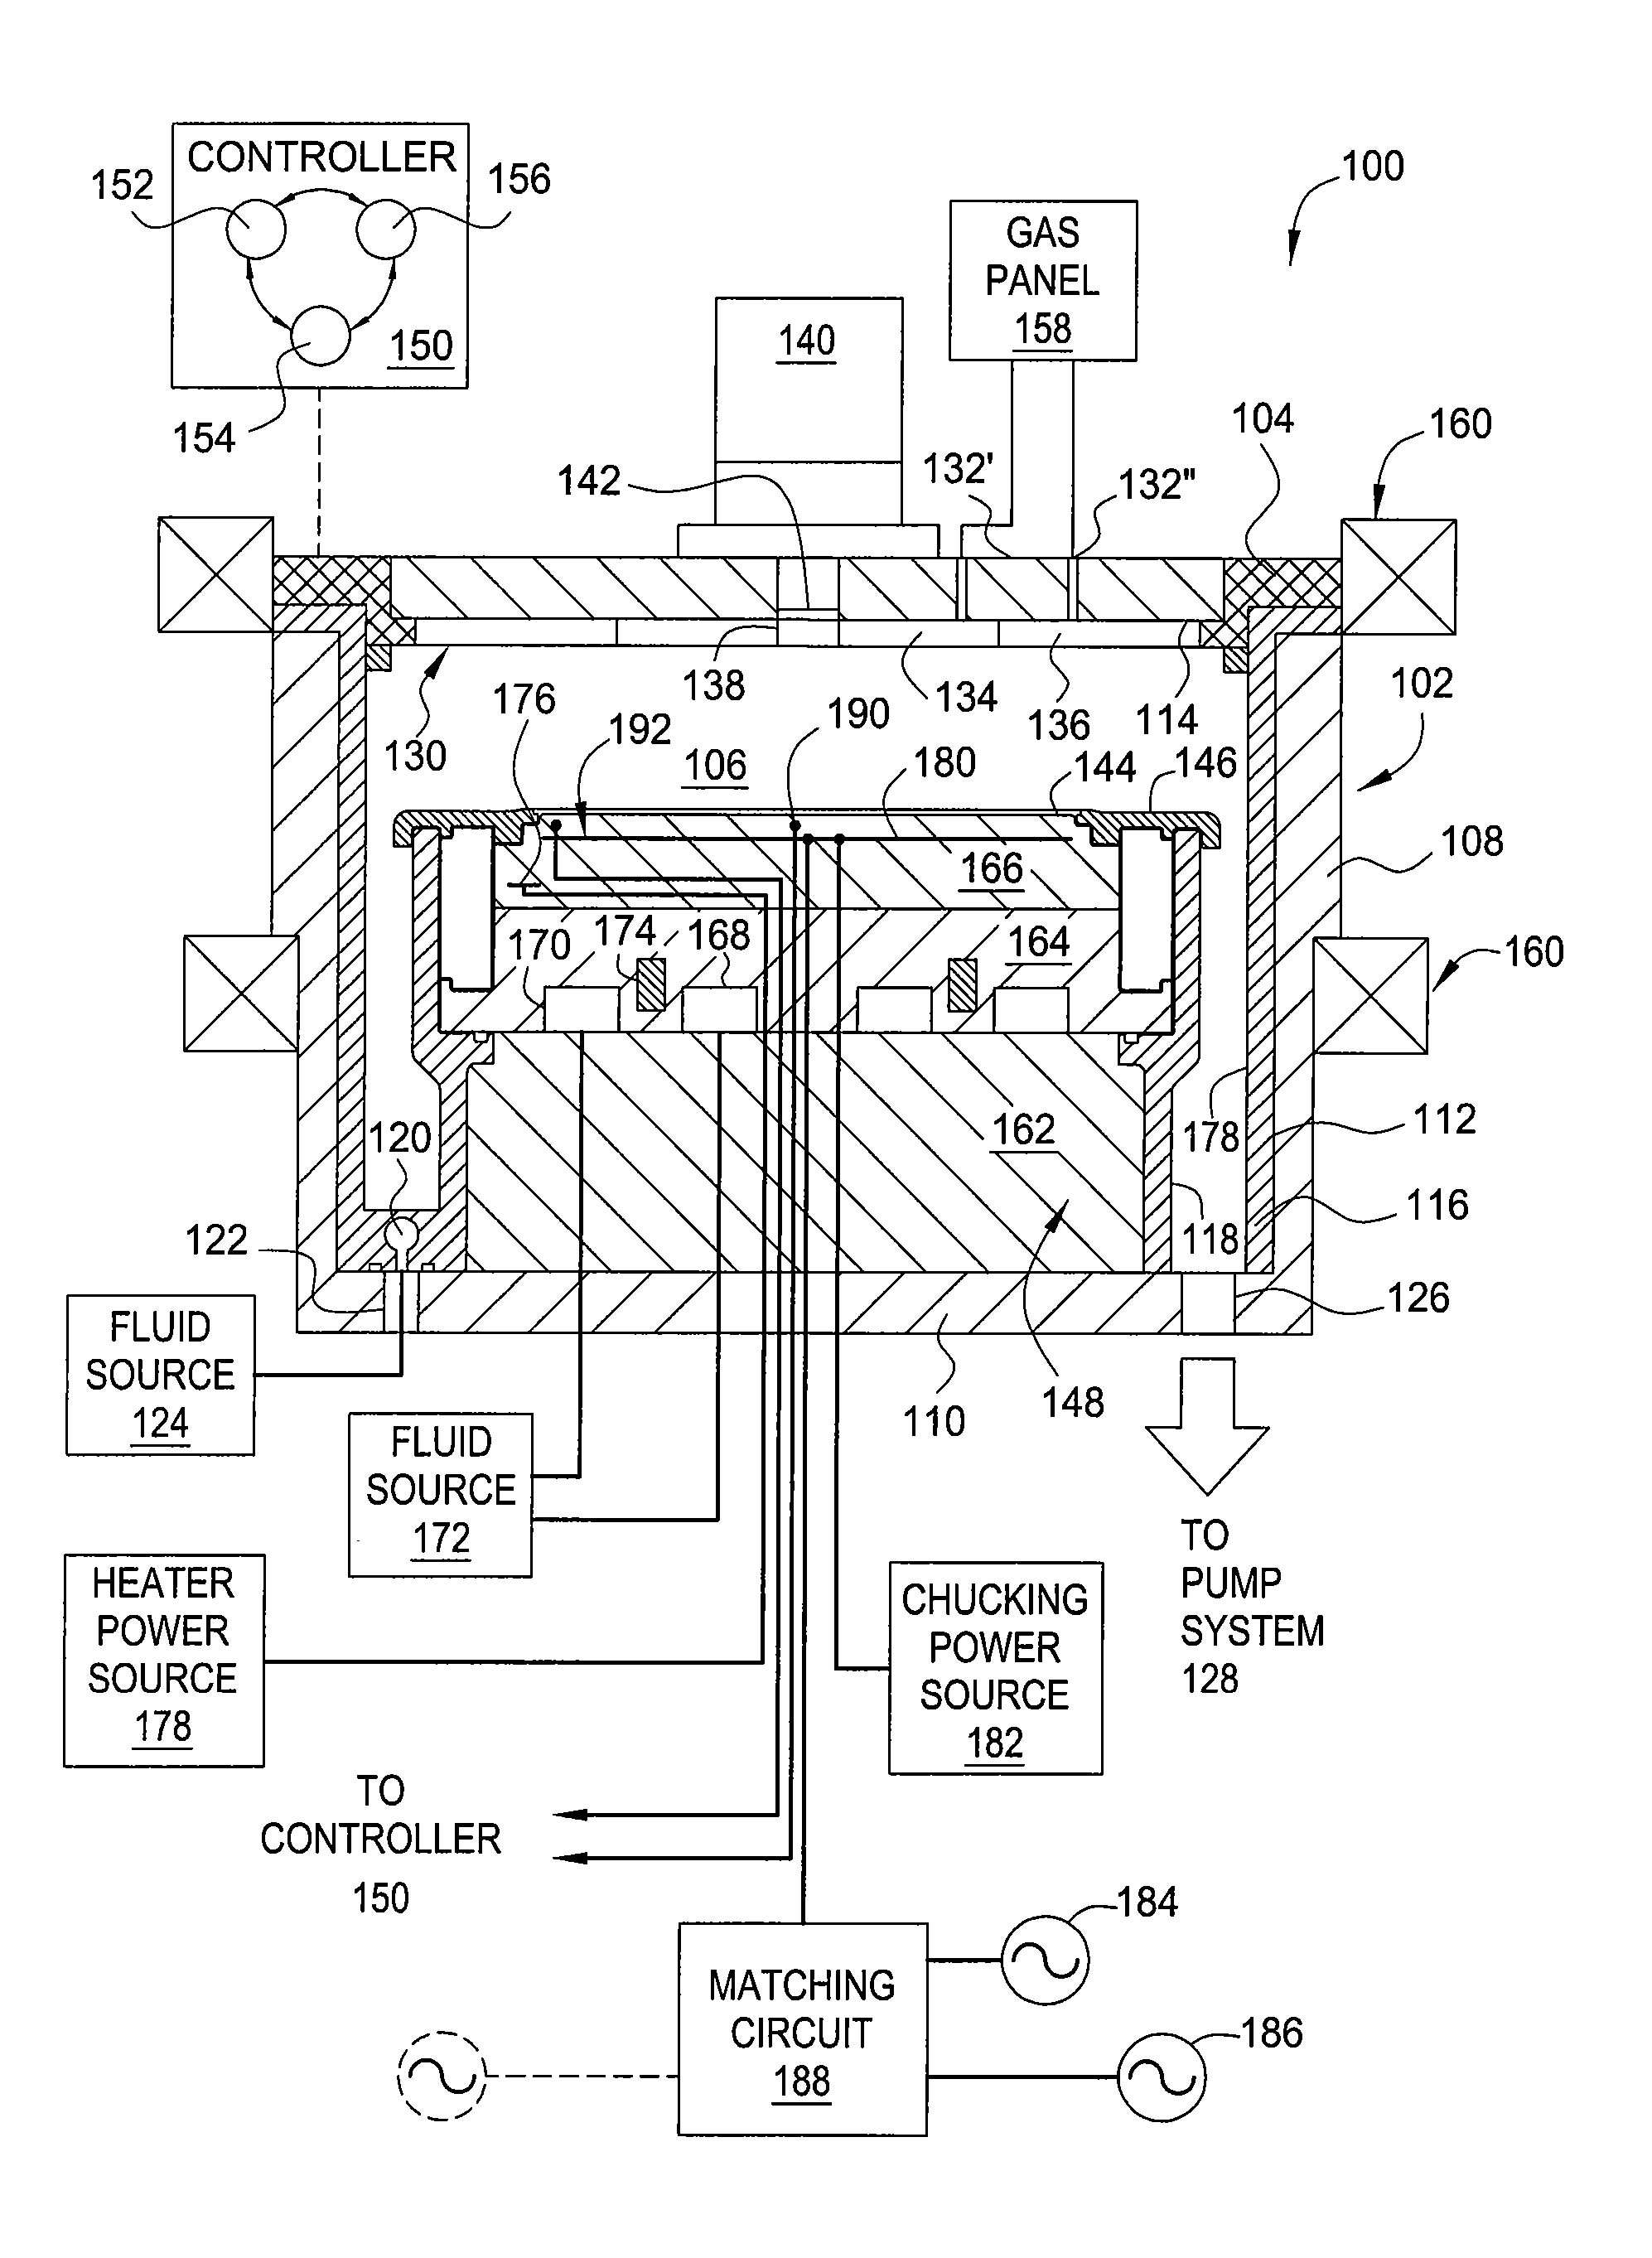 Apparatus for etching high aspect ratio features